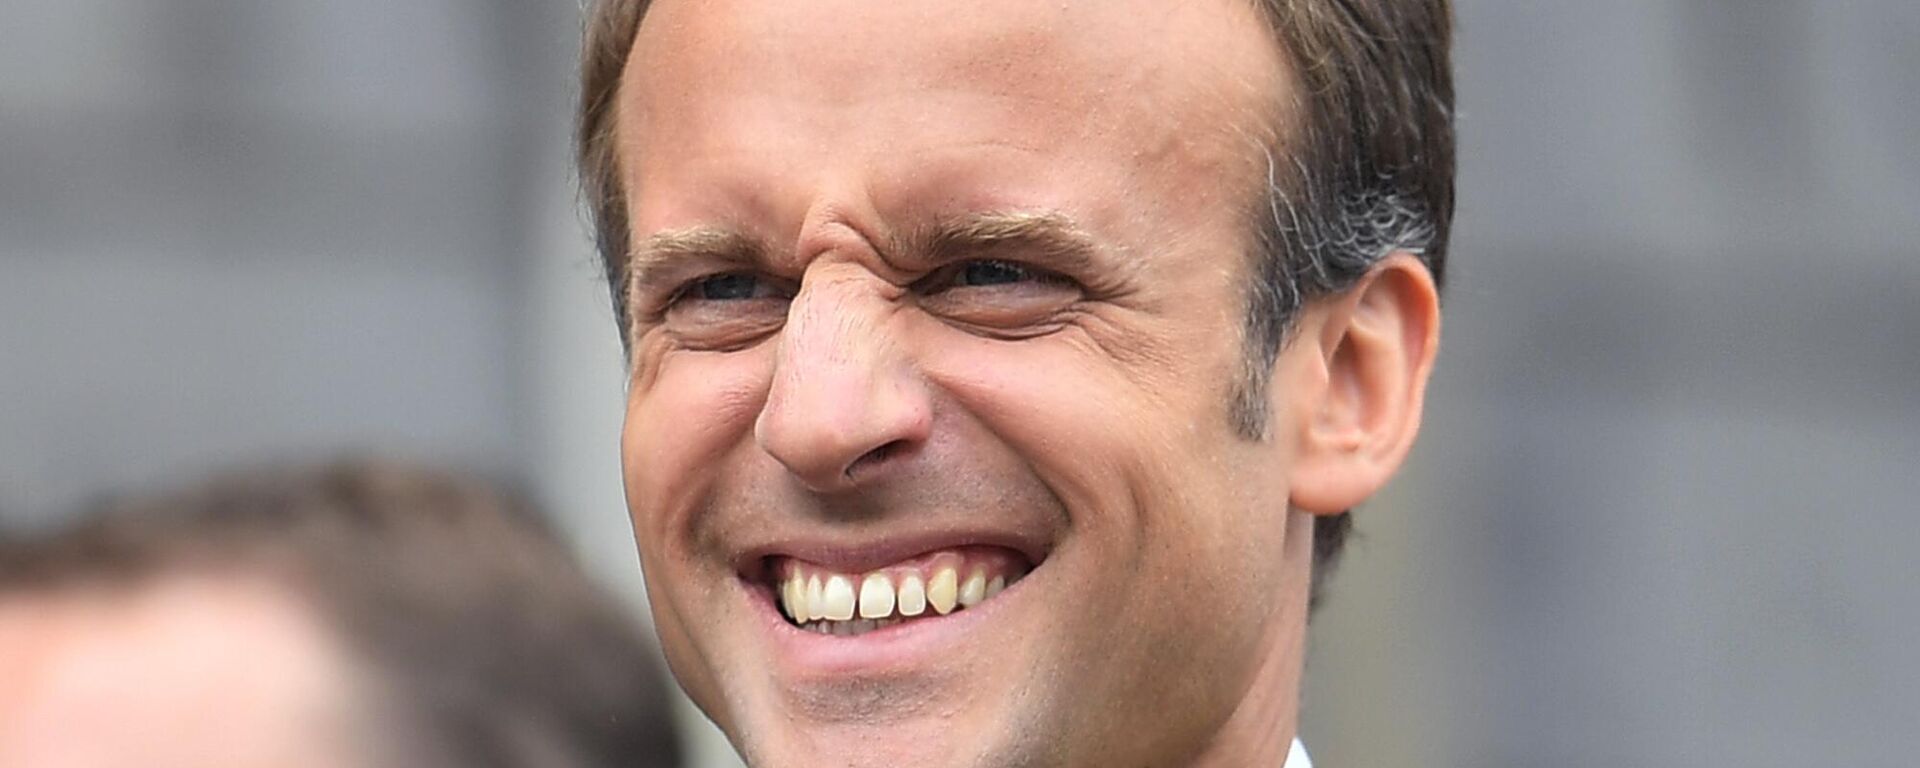 French President Emmanuel Macron grimaces on the town hall balcony on occasion of the Charlemagne Prize awarding in Aachen, Germany, Thursday, May 10, 2018 - Sputnik International, 1920, 19.03.2024